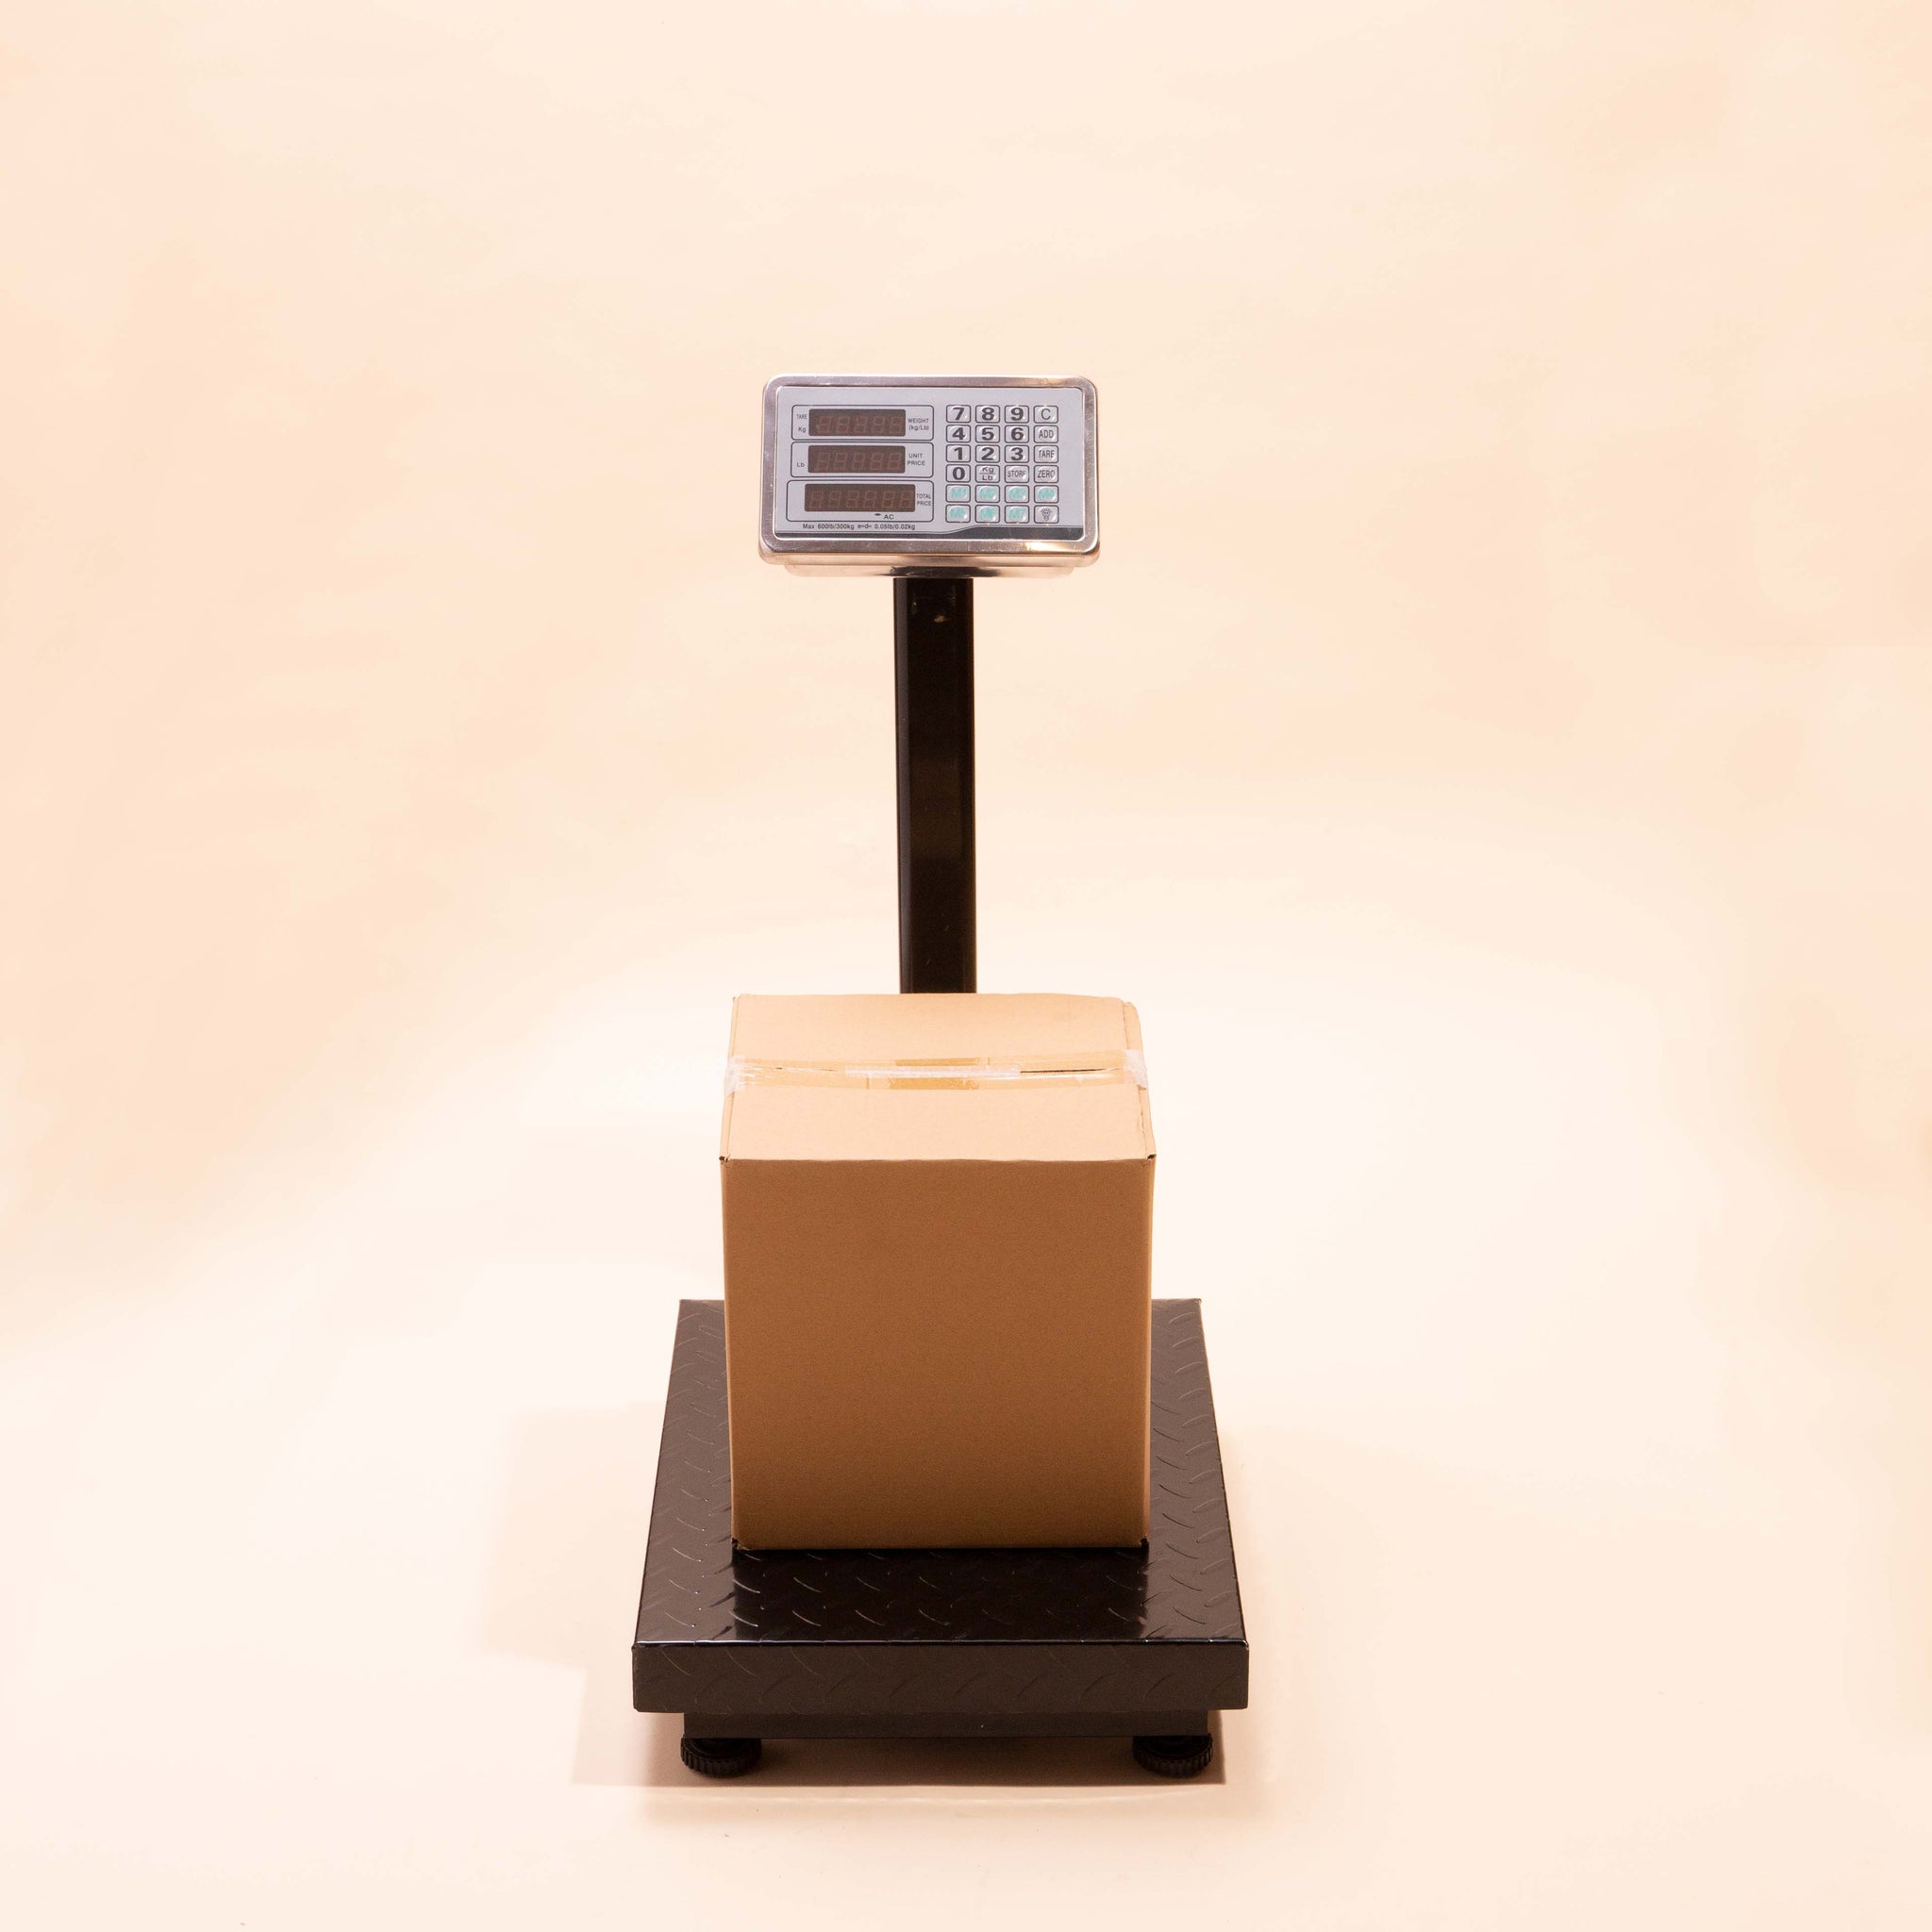 Houseables Digital Postal Scale, Shipping Scales For Packages, 22 x 18,  Stainless Steel, 400 lbs. Max Weight, Extra Large Platform, Heavy Duty, LED